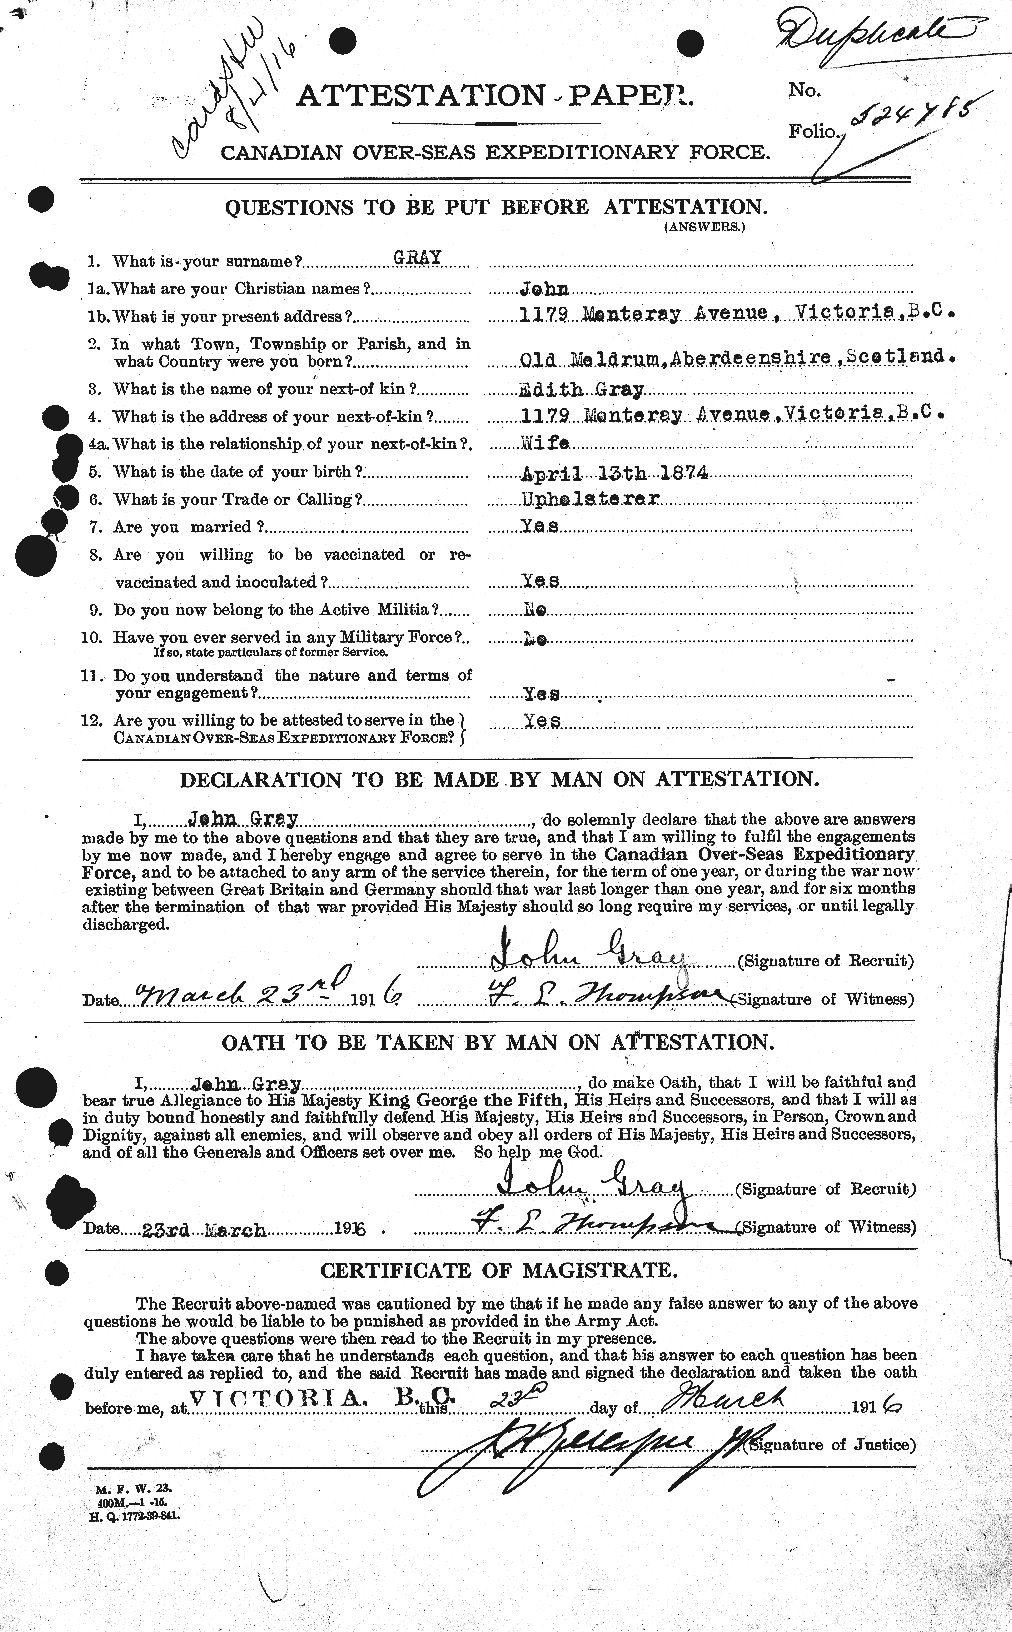 Personnel Records of the First World War - CEF 363341a